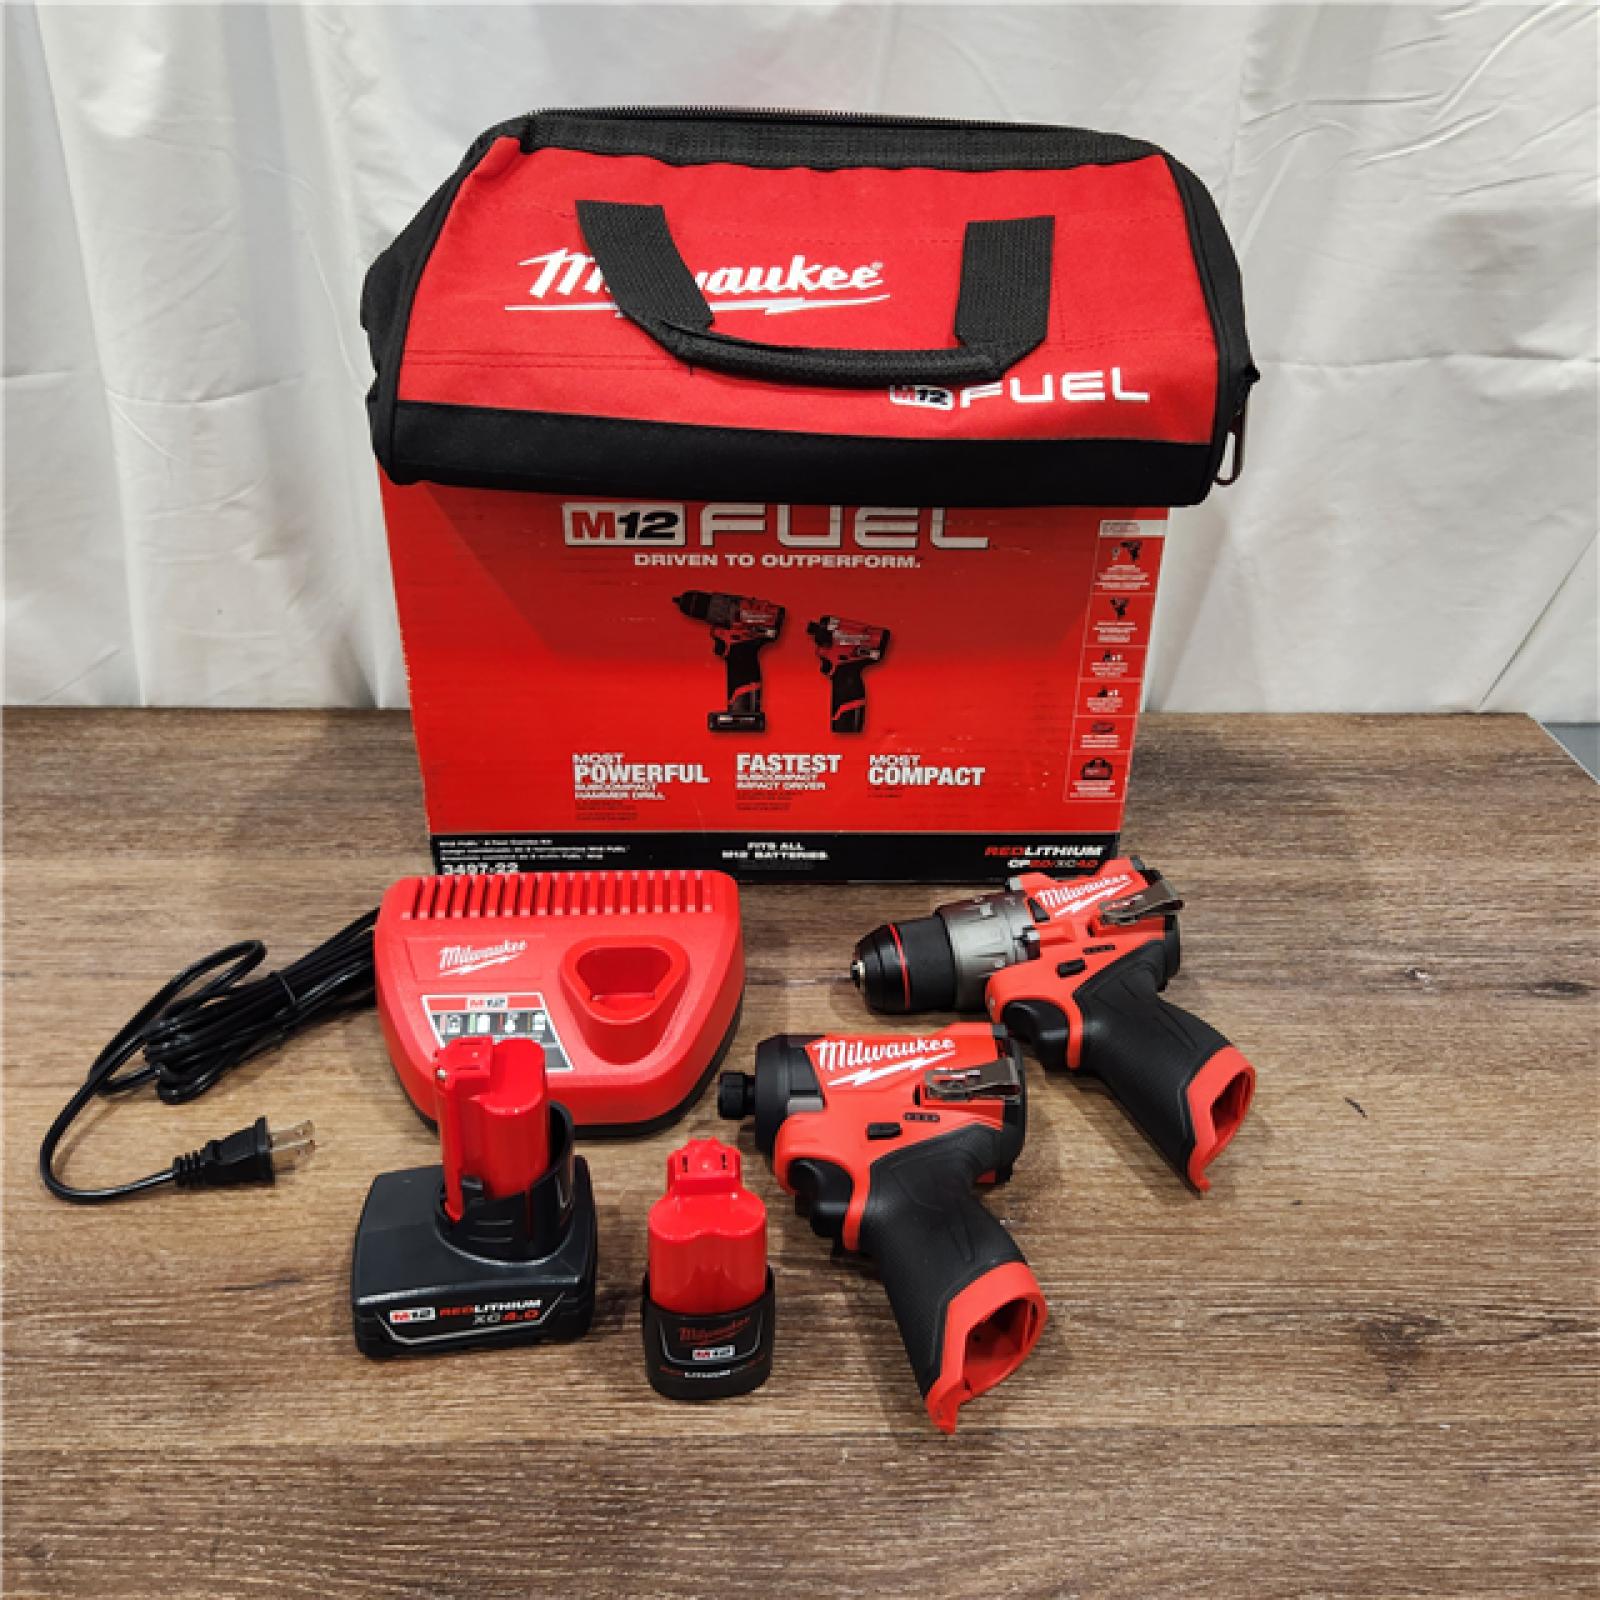 AS-IS M12 FUEL 12-Volt Lithium-Ion Brushless Cordless Hammer Drill and Impact Driver Combo Kit W/2 Batteries and Bag (2-Tool)